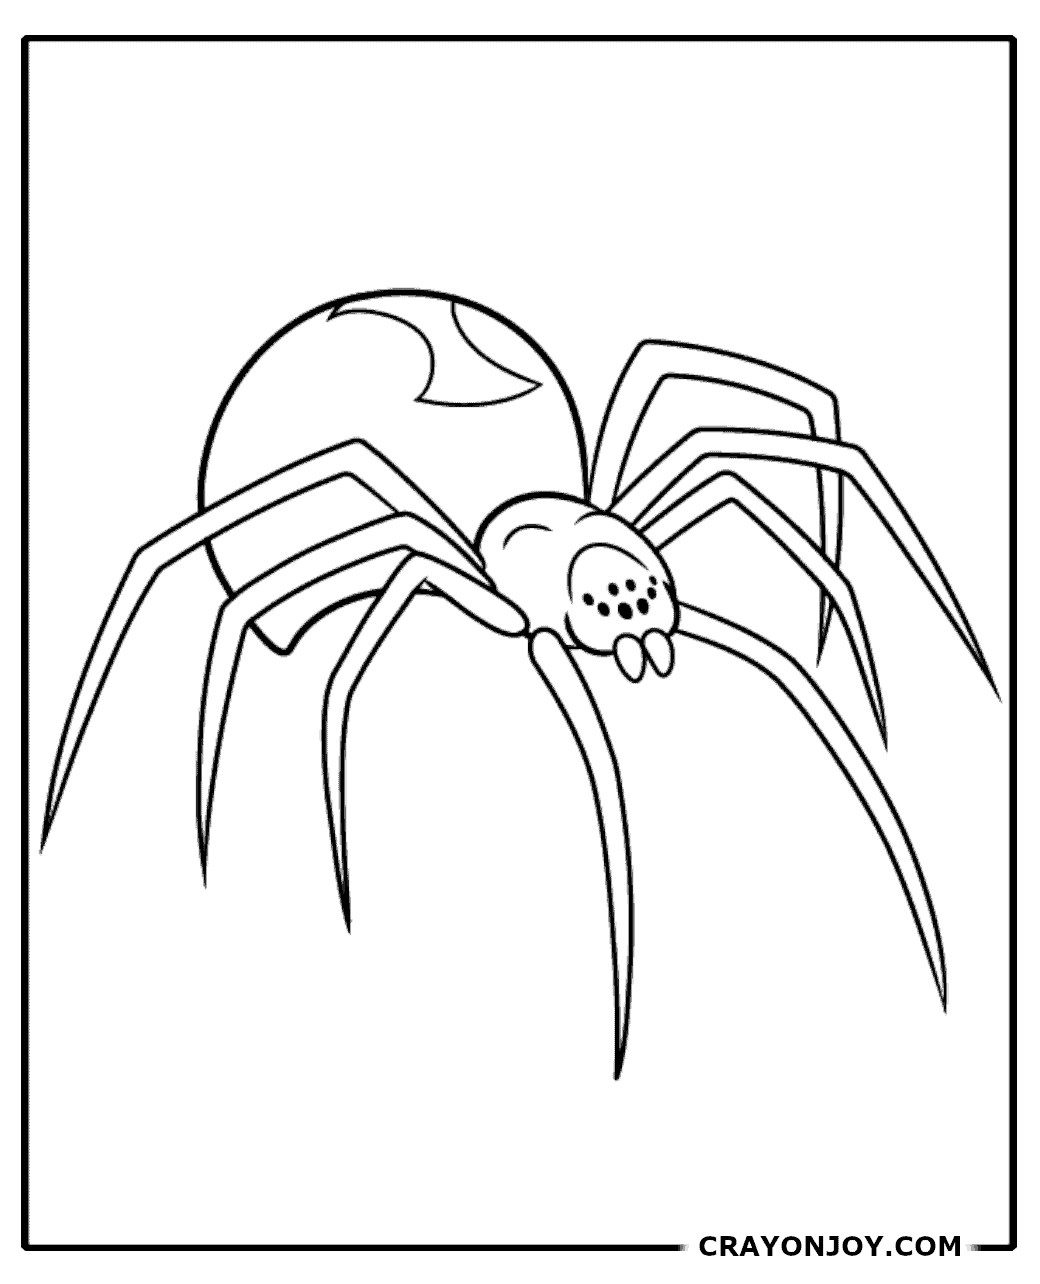 Spider Coloring Pages: Free Printable Sheets for Kids and Adults